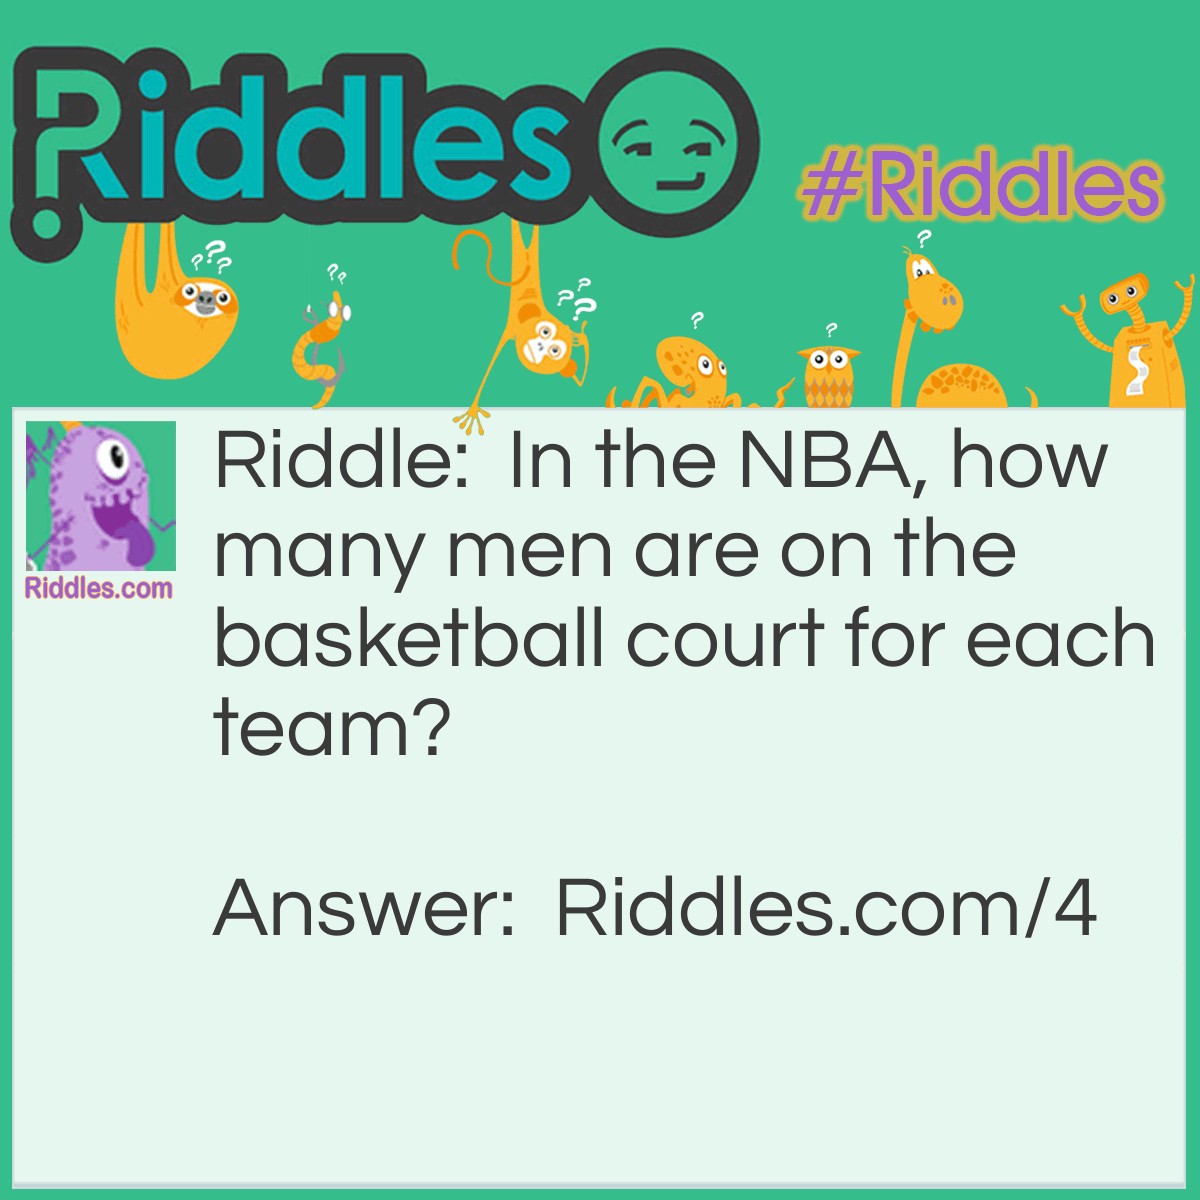 Riddle: In the NBA, how many men are on the basketball court for each team? Answer: Five, not ten!